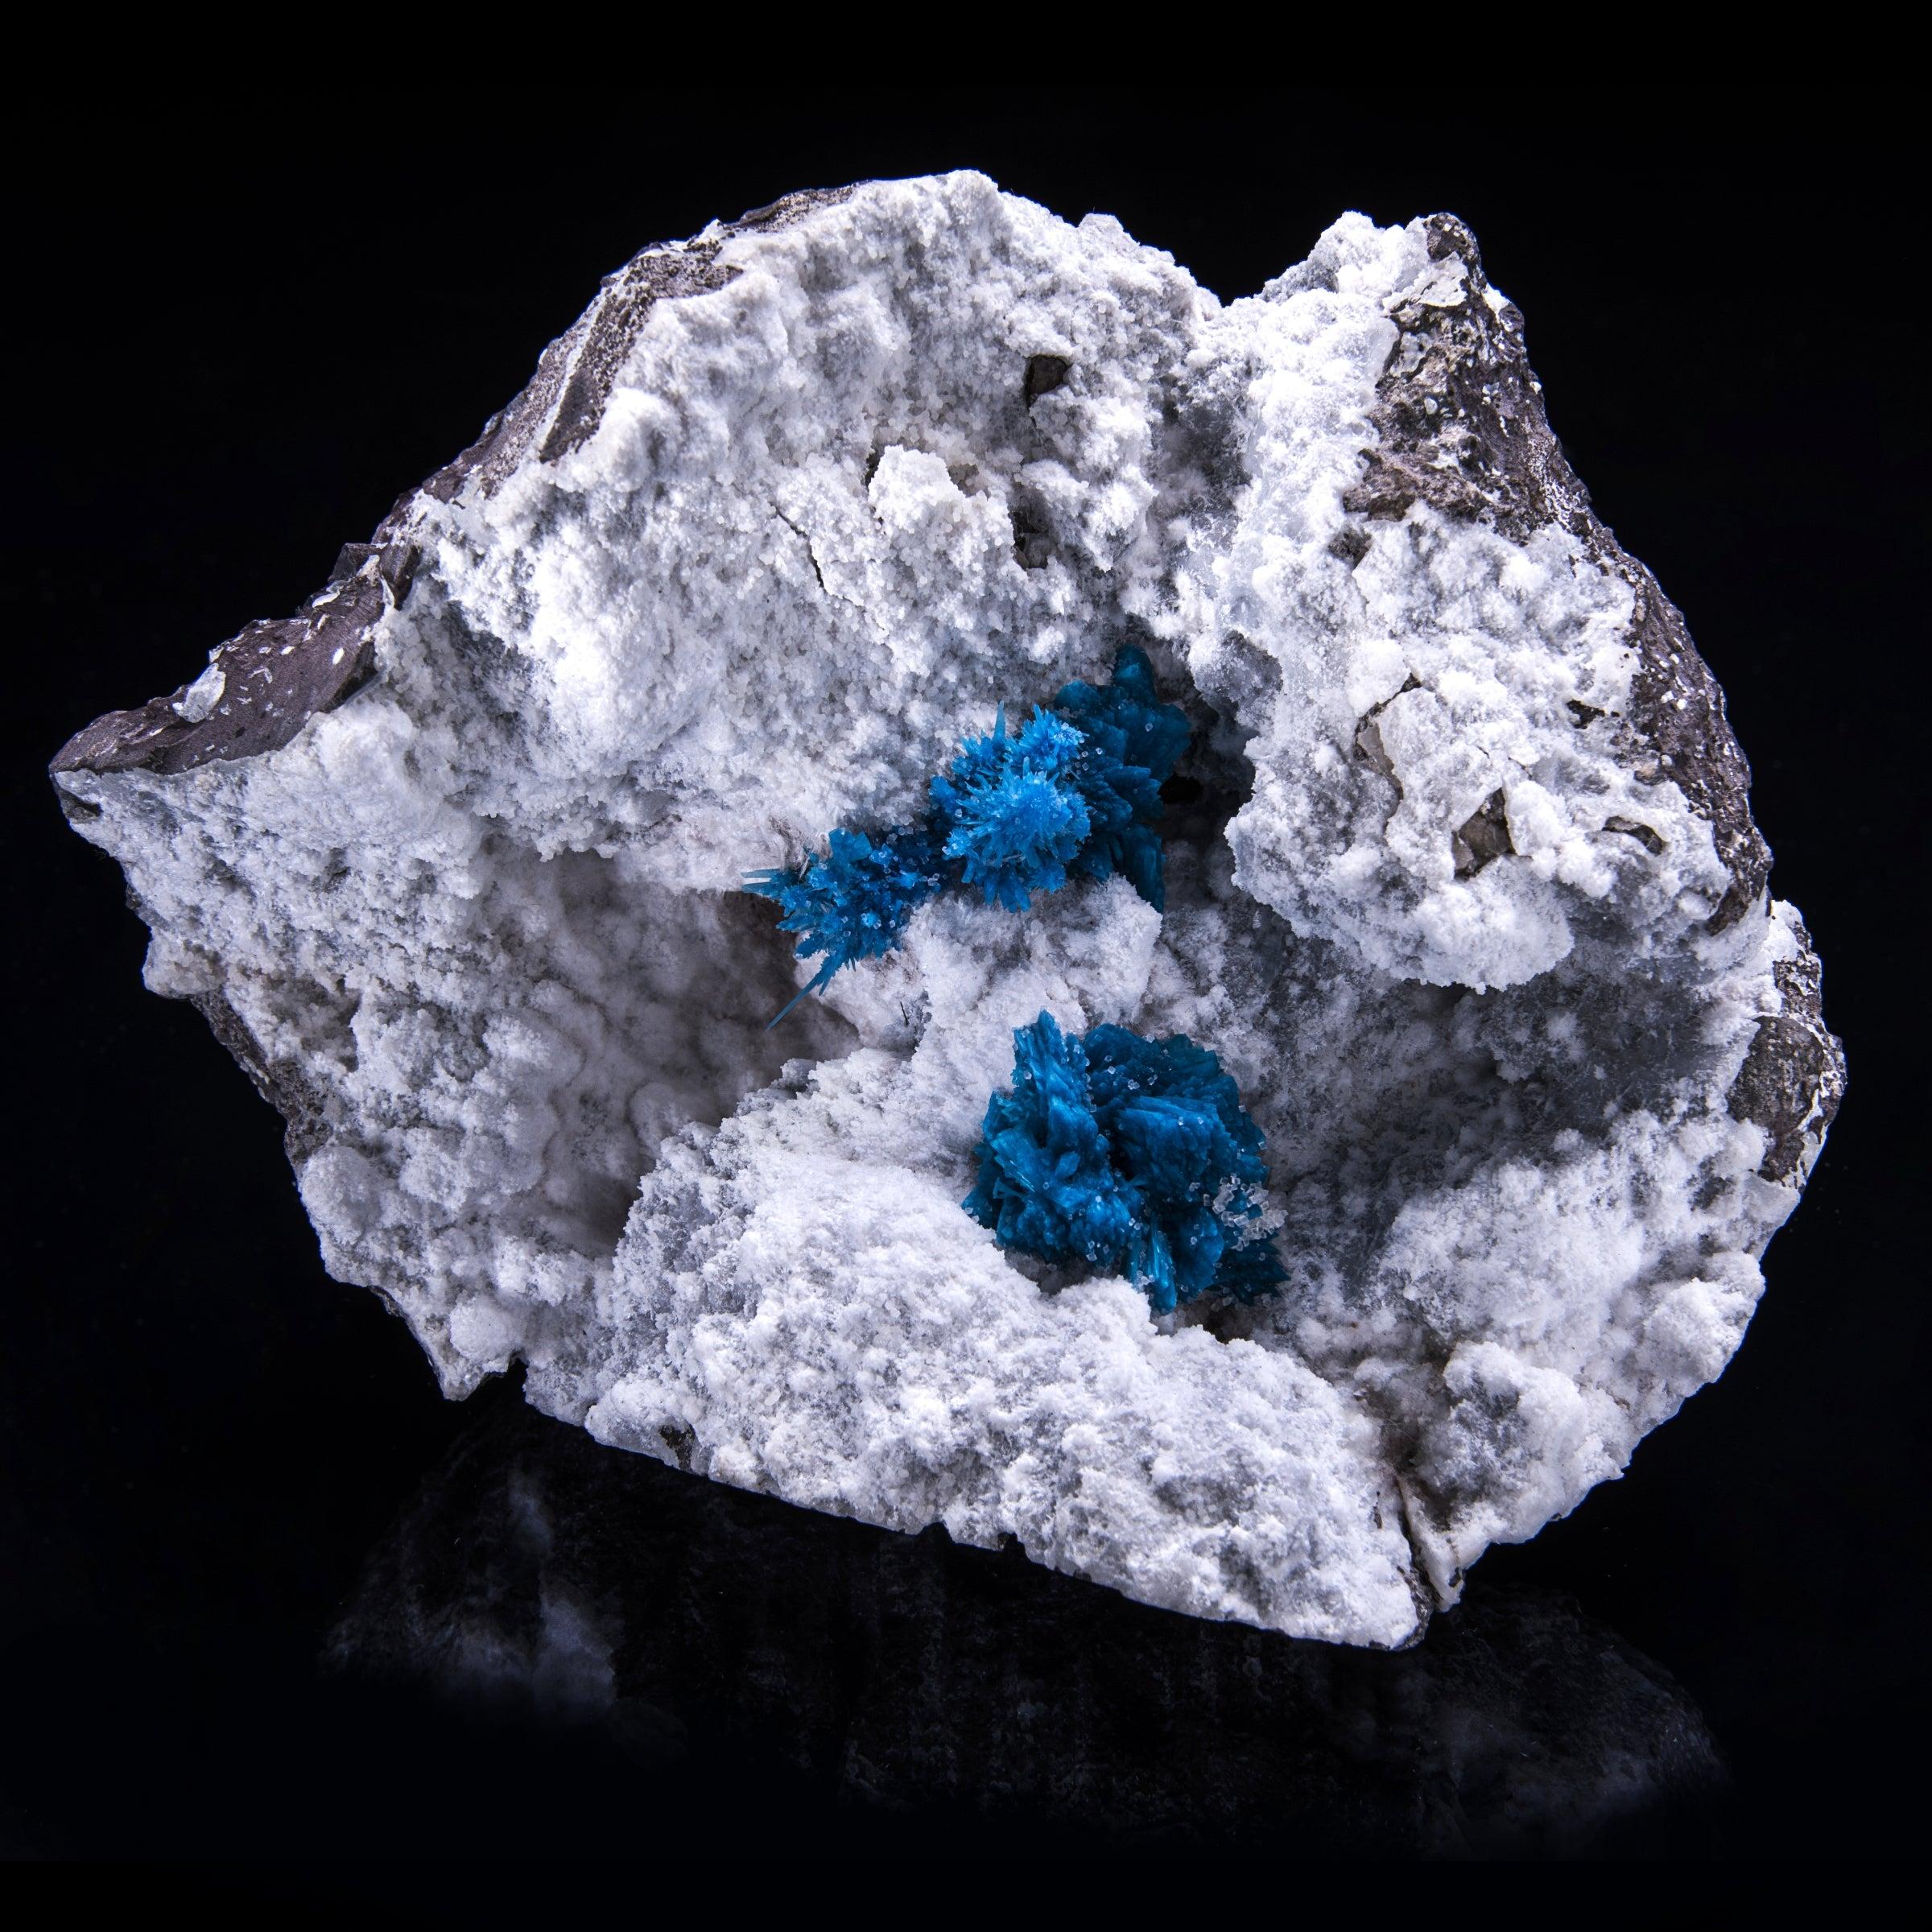 Punna, India

An absolutely showstopping specimen out of the mine in Punna, India. It features both the stunning blues of the cavansite and pentagonite highlighted against a white matrix creating a stark contrast. An incredible find as these two